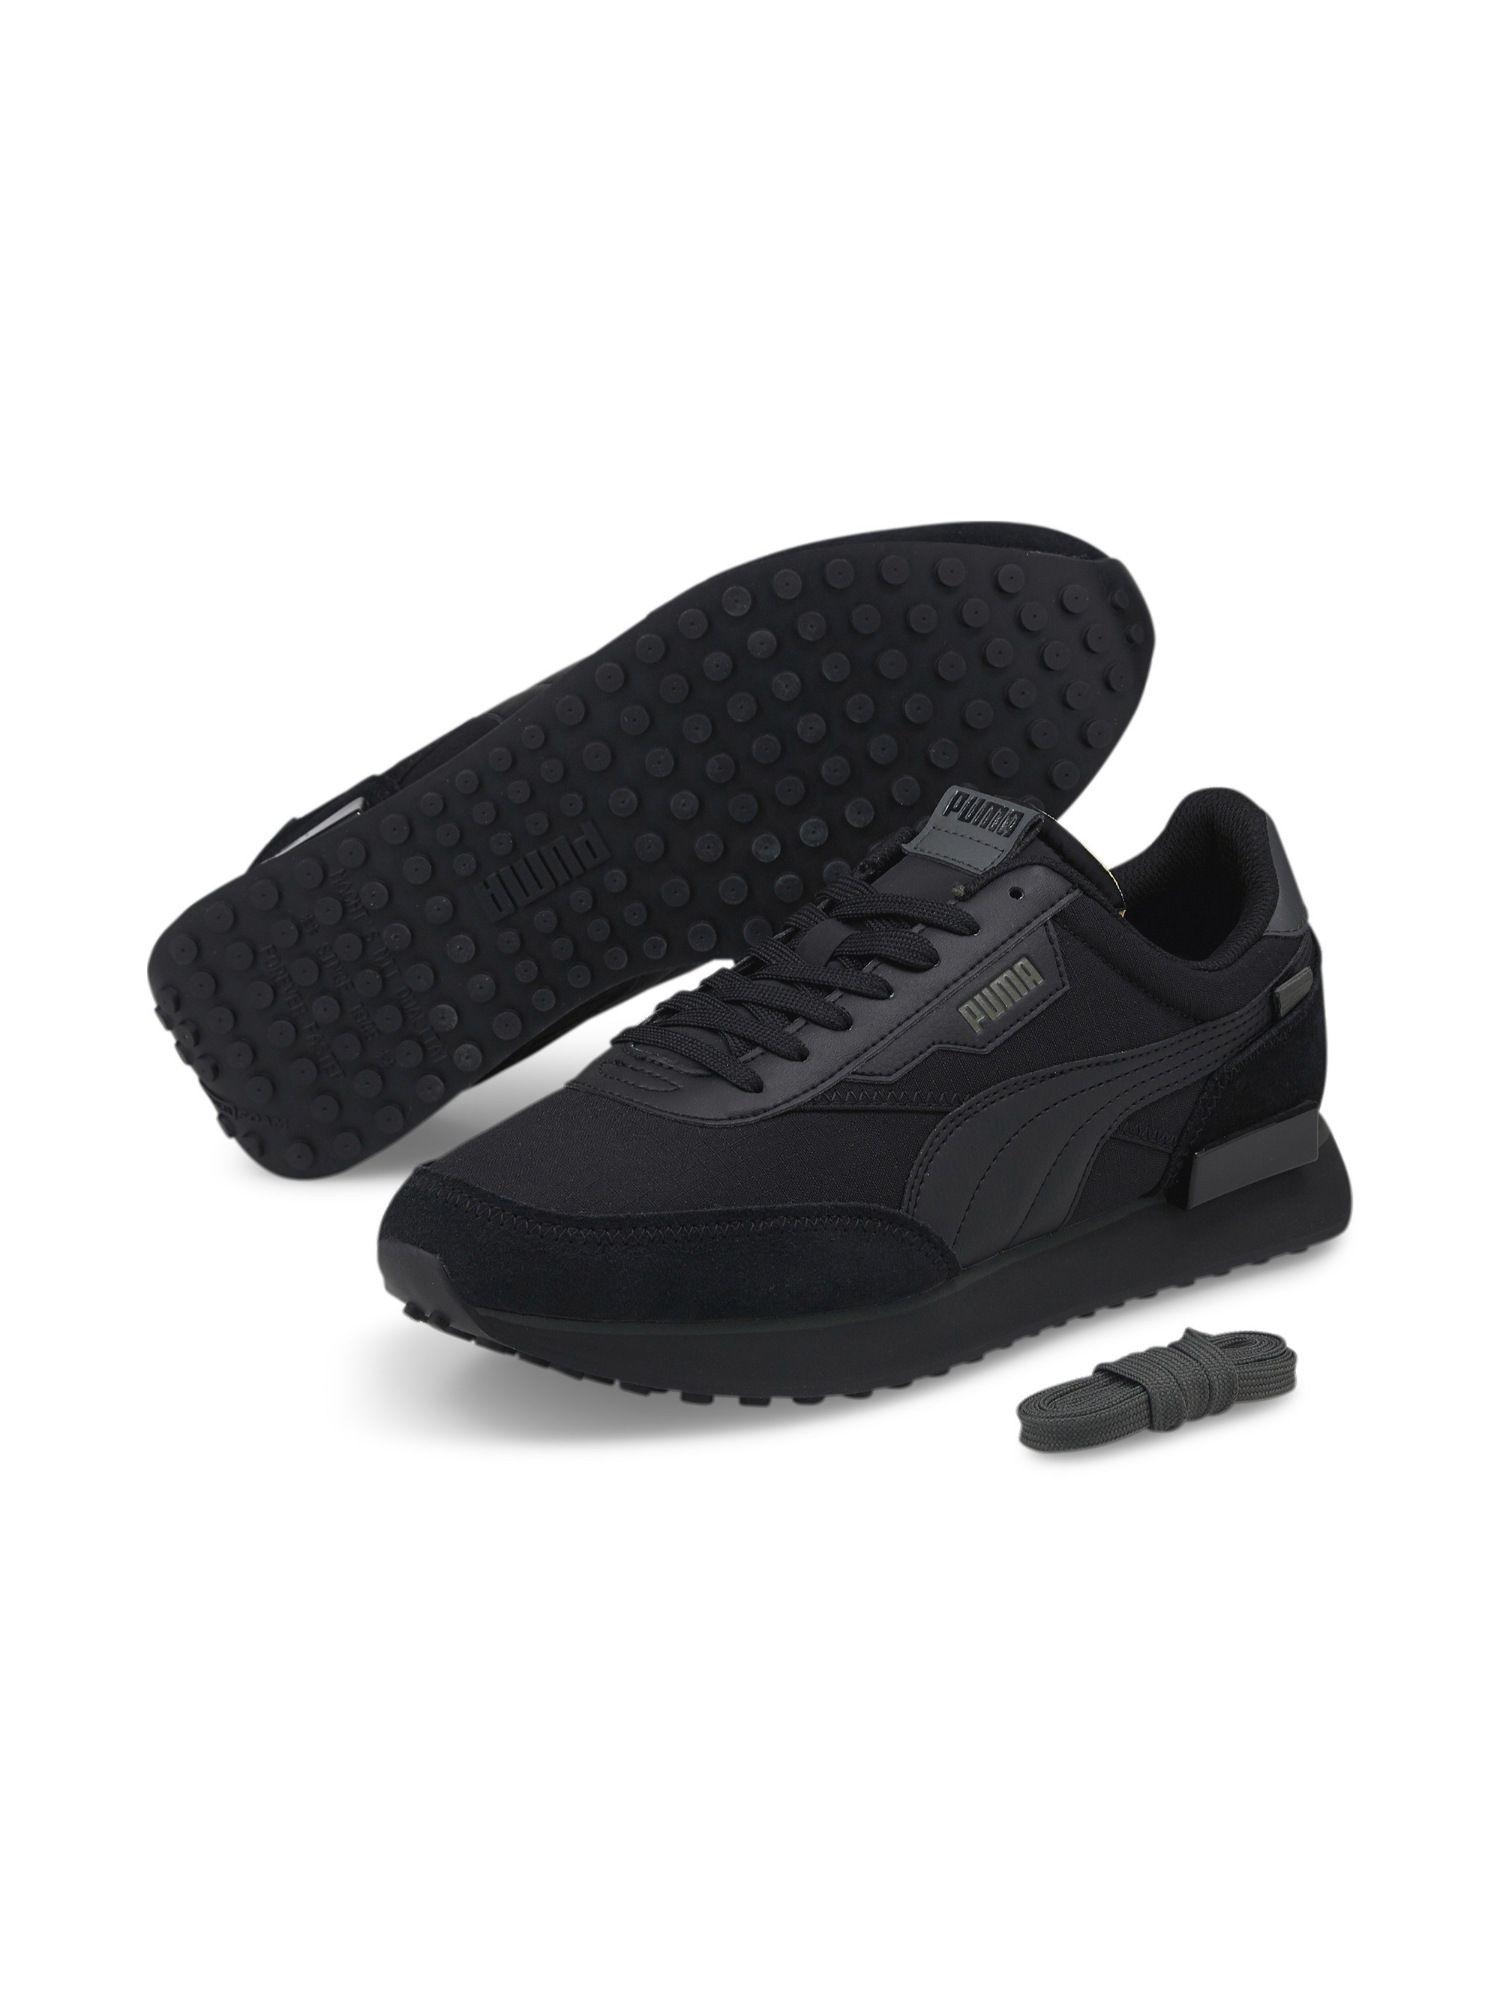 future-rider-play-on-mens-black-sneakers